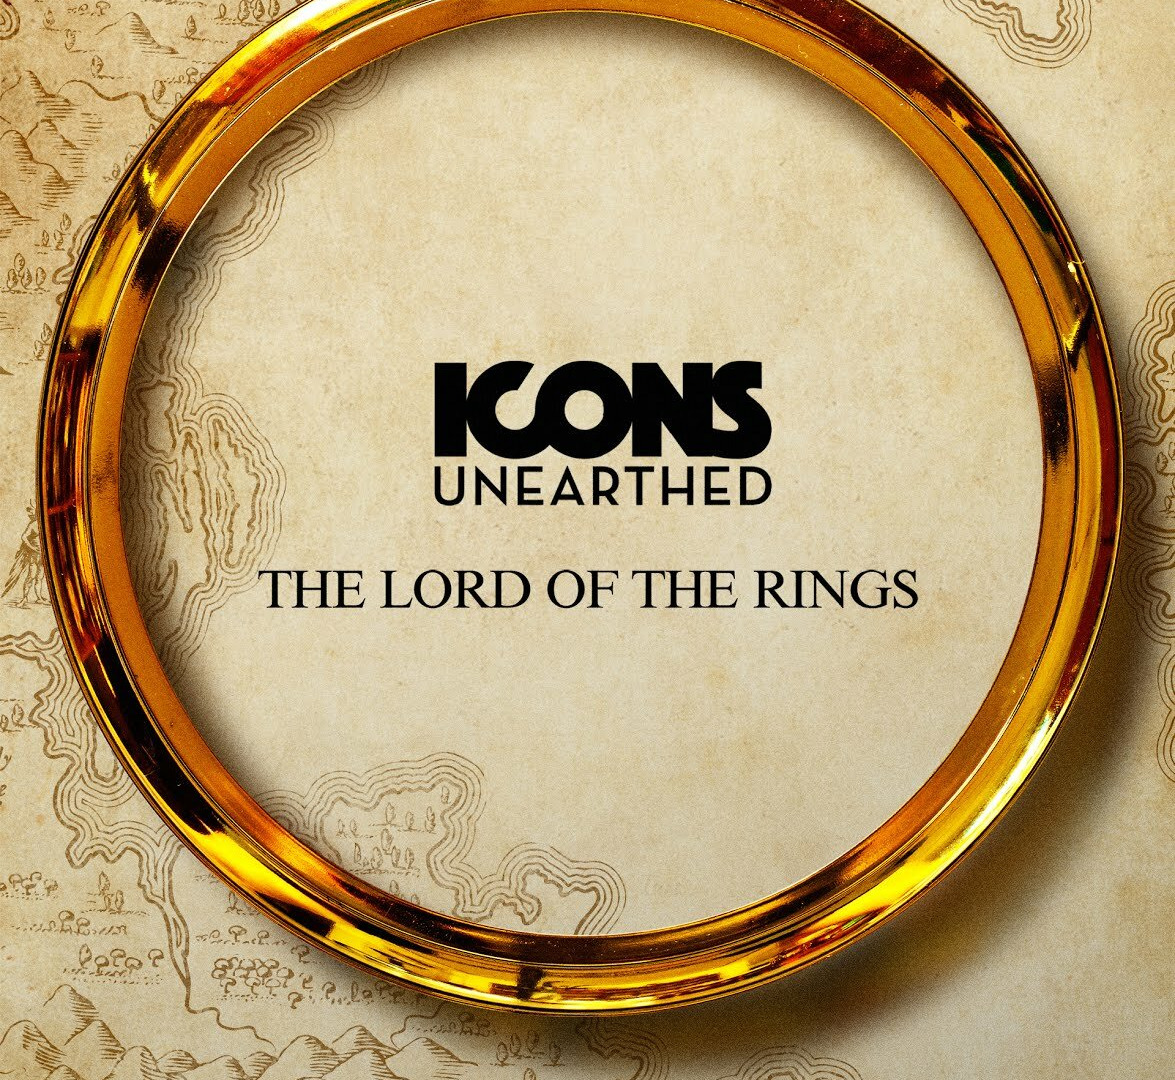 Show Icons Unearthed: The Lord of the Rings